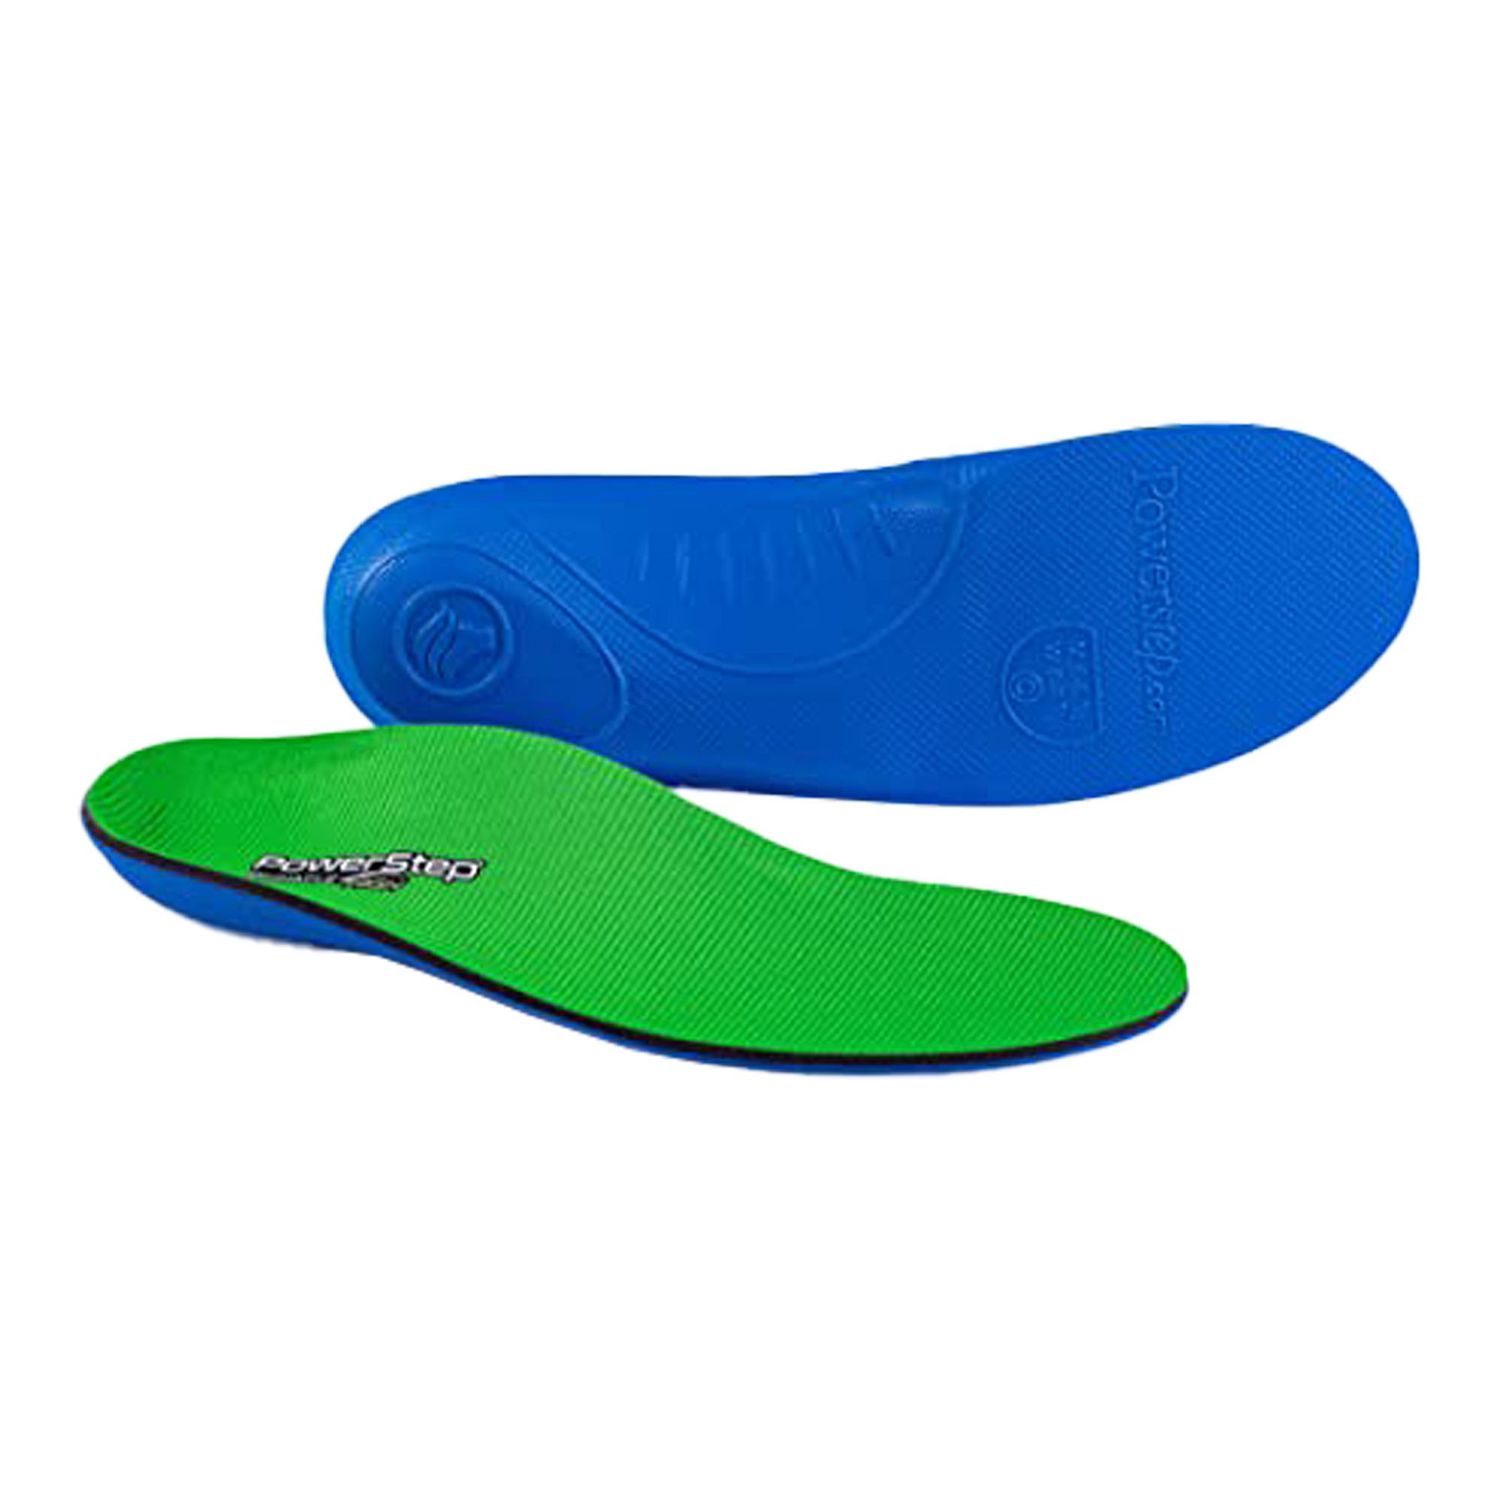 PowerStep-Shoe-Insoles-Product